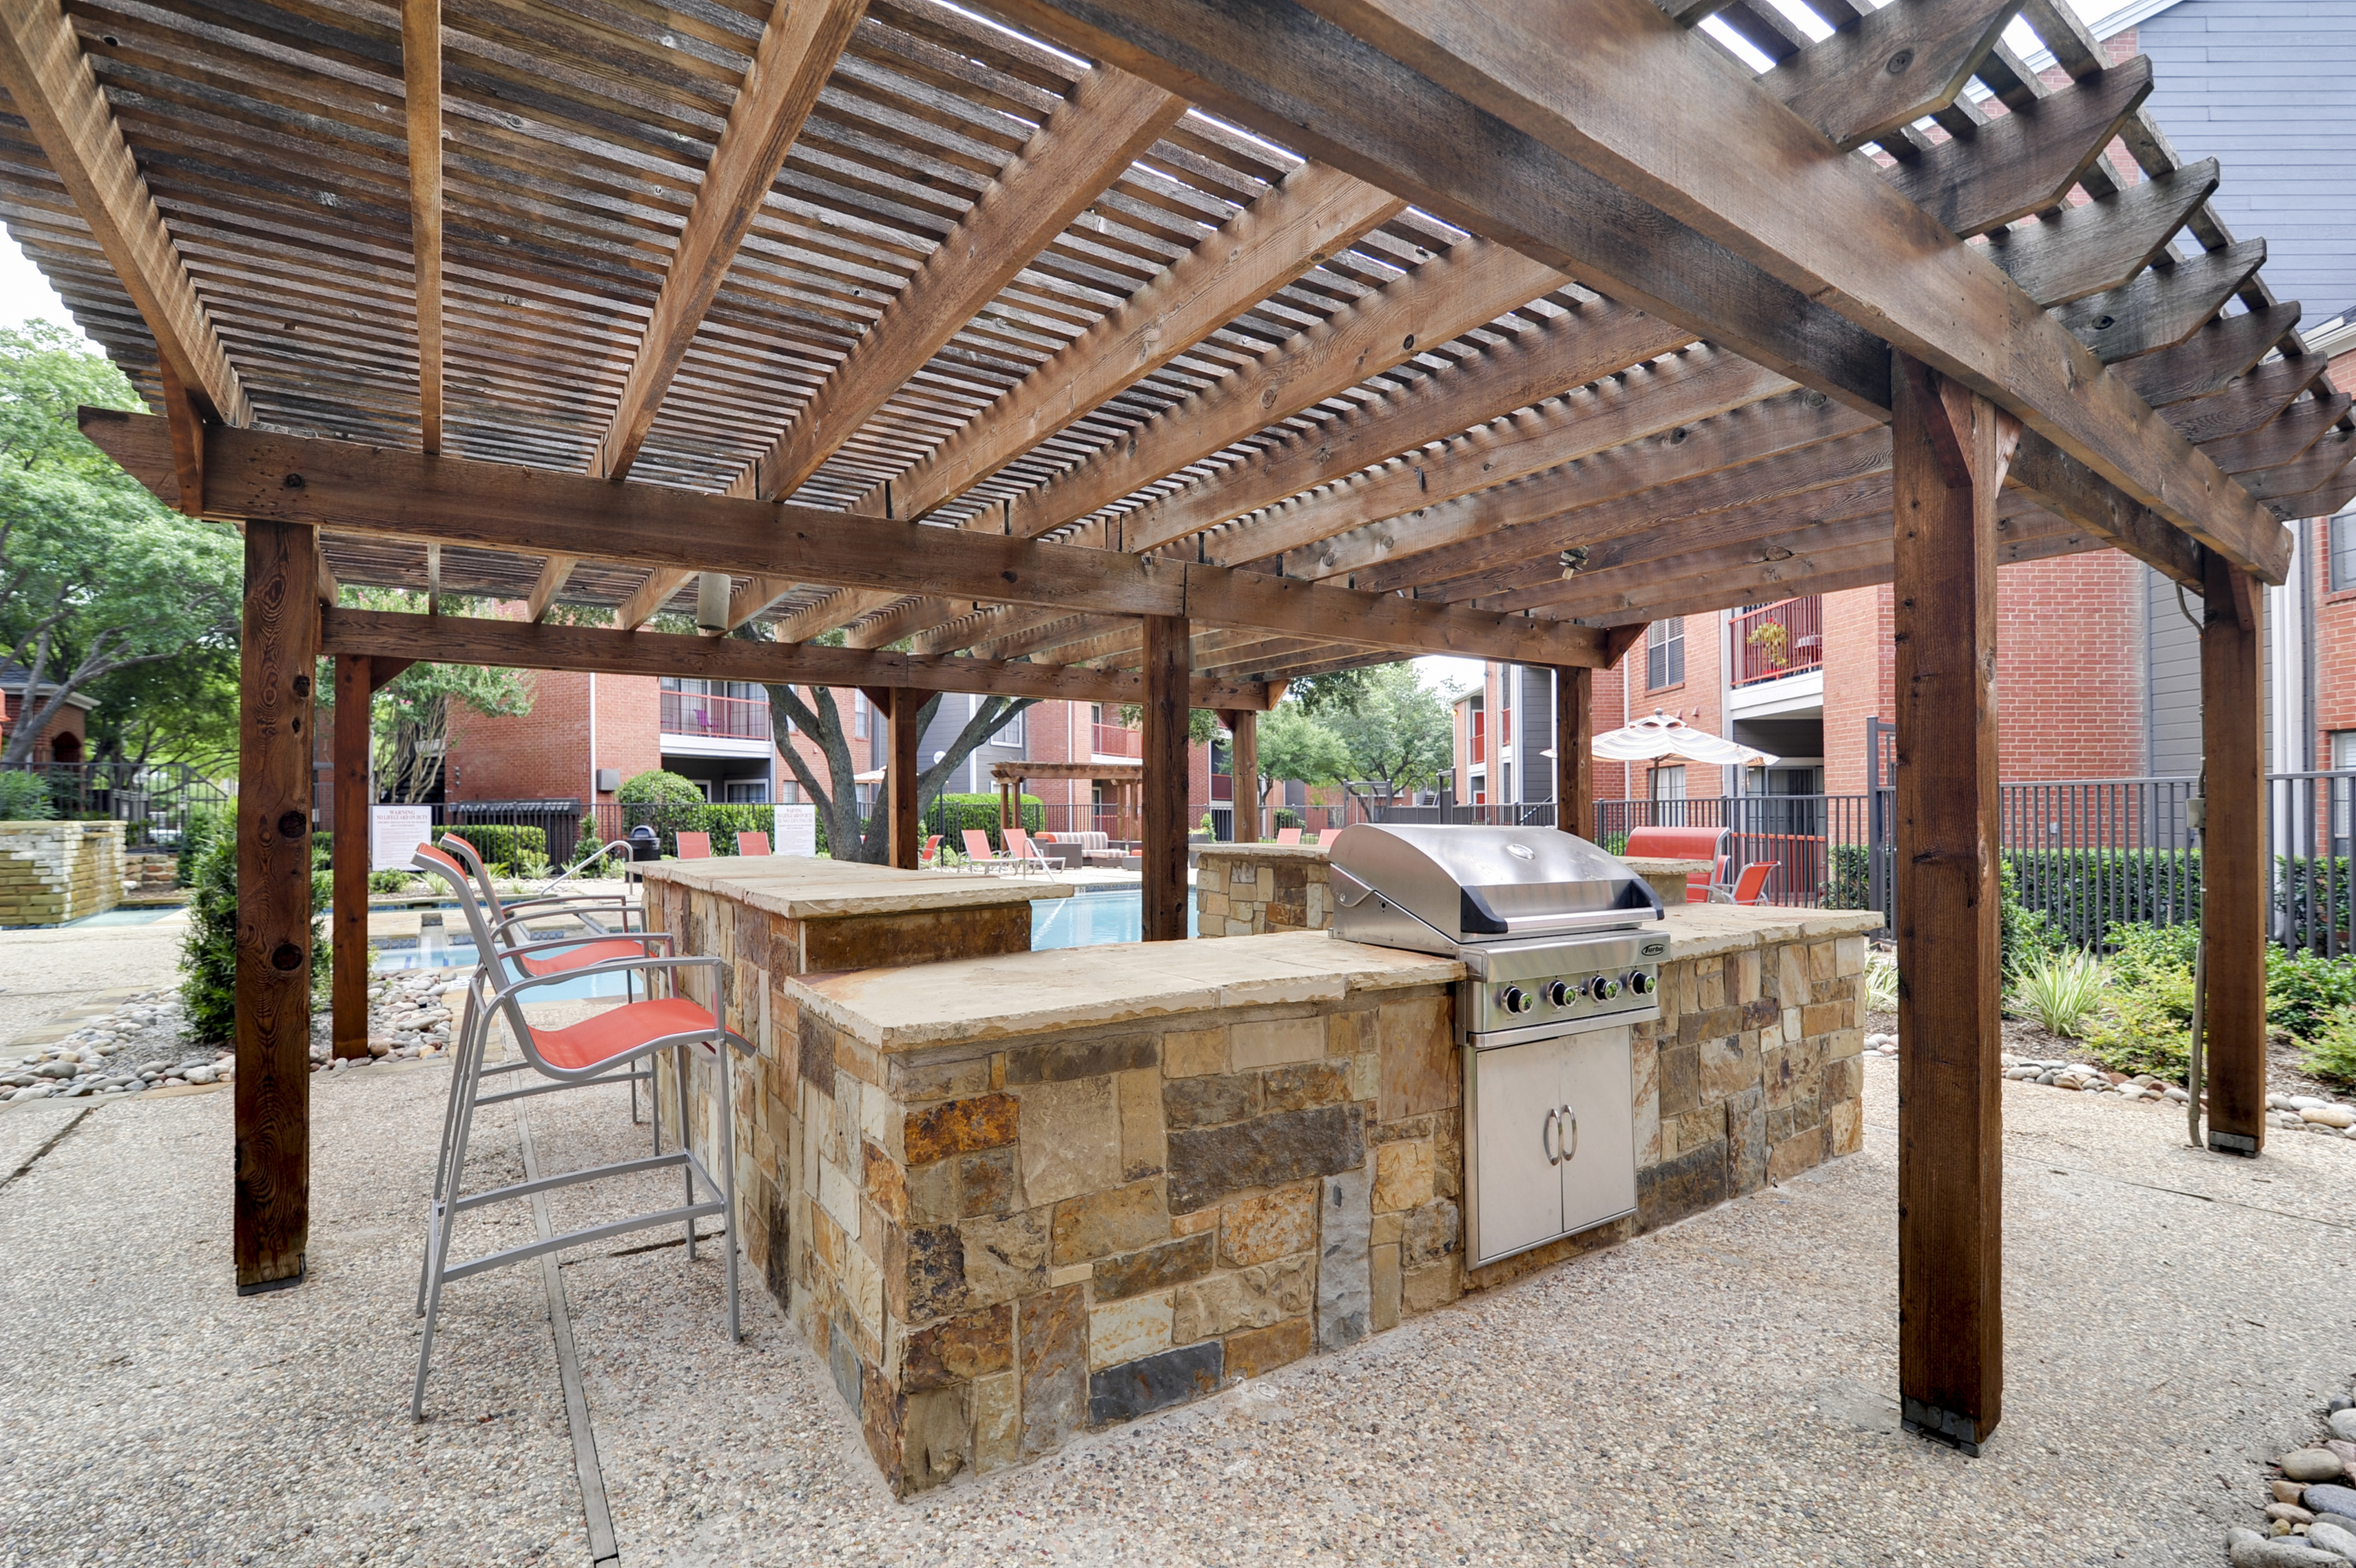 View of Grilling Lounge, Showing Grill, Serving Area, Chairs, and Pergola at 4804 Haverwood Apartments